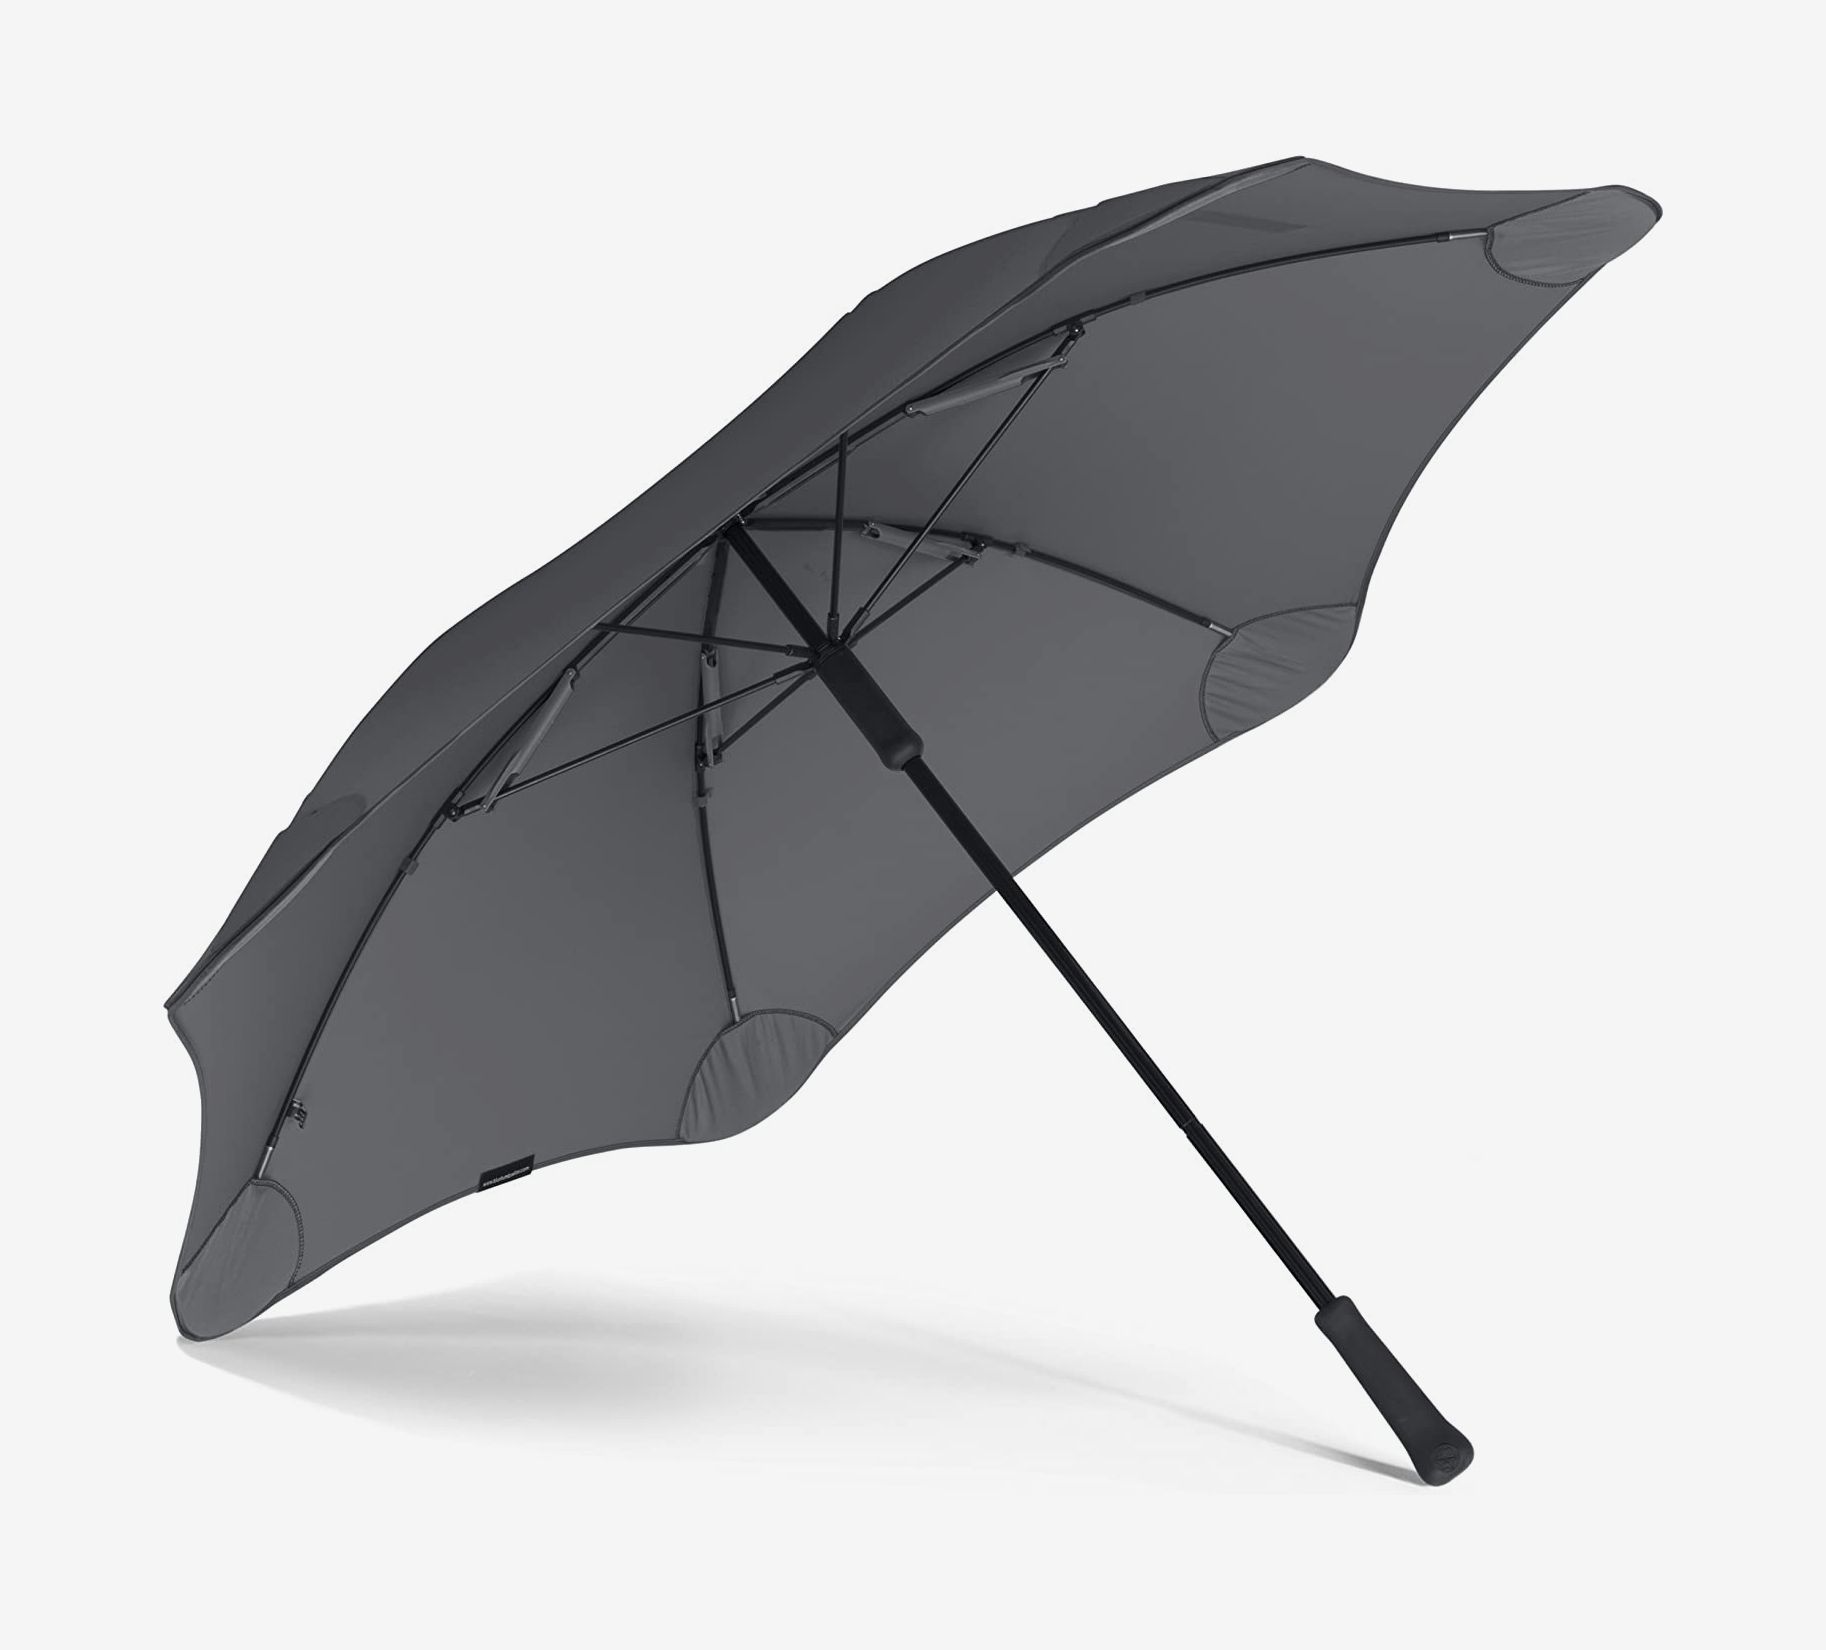 Top Quality Rain Umbrella 24K Strong Windproof Glassfiber Frame Wooden Parapluie 